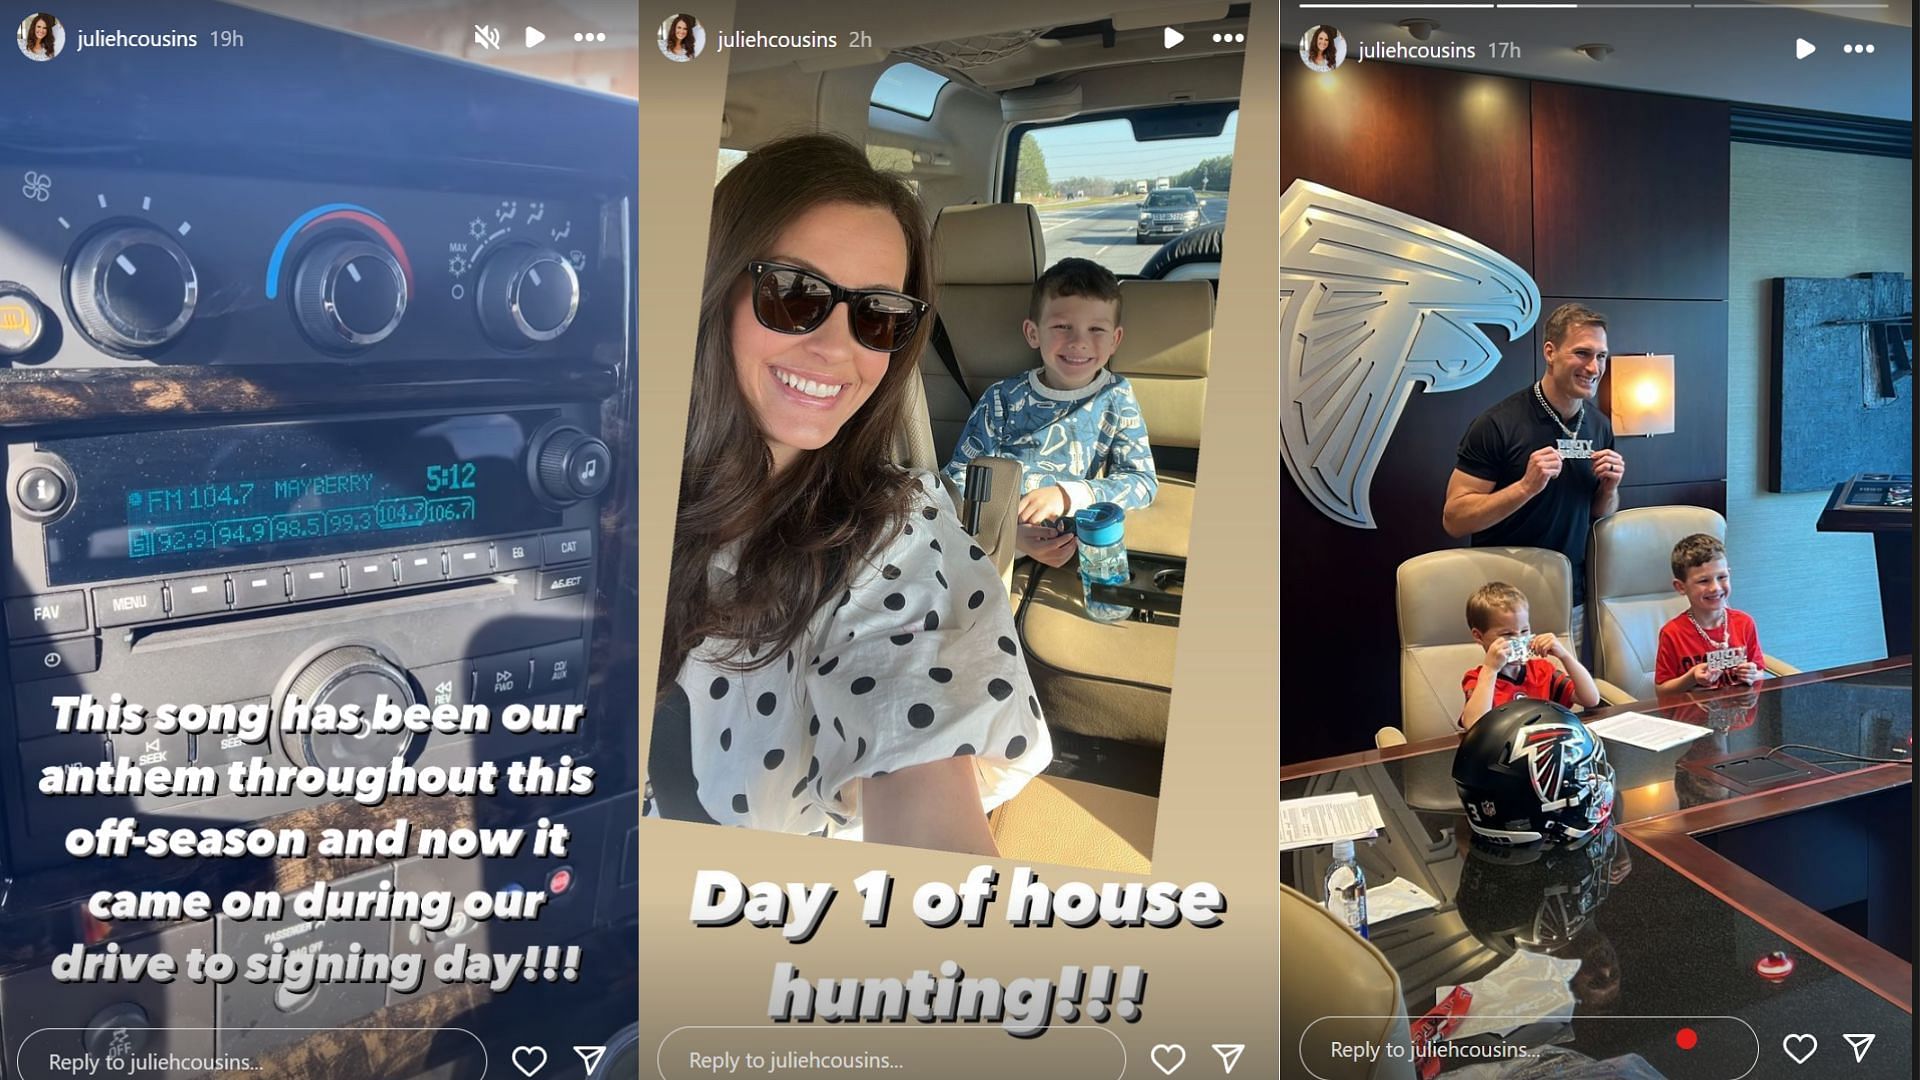 Kirk Cousins, wife Julie and his children begin house hunting in Atlanta (From:@juliehcousins)